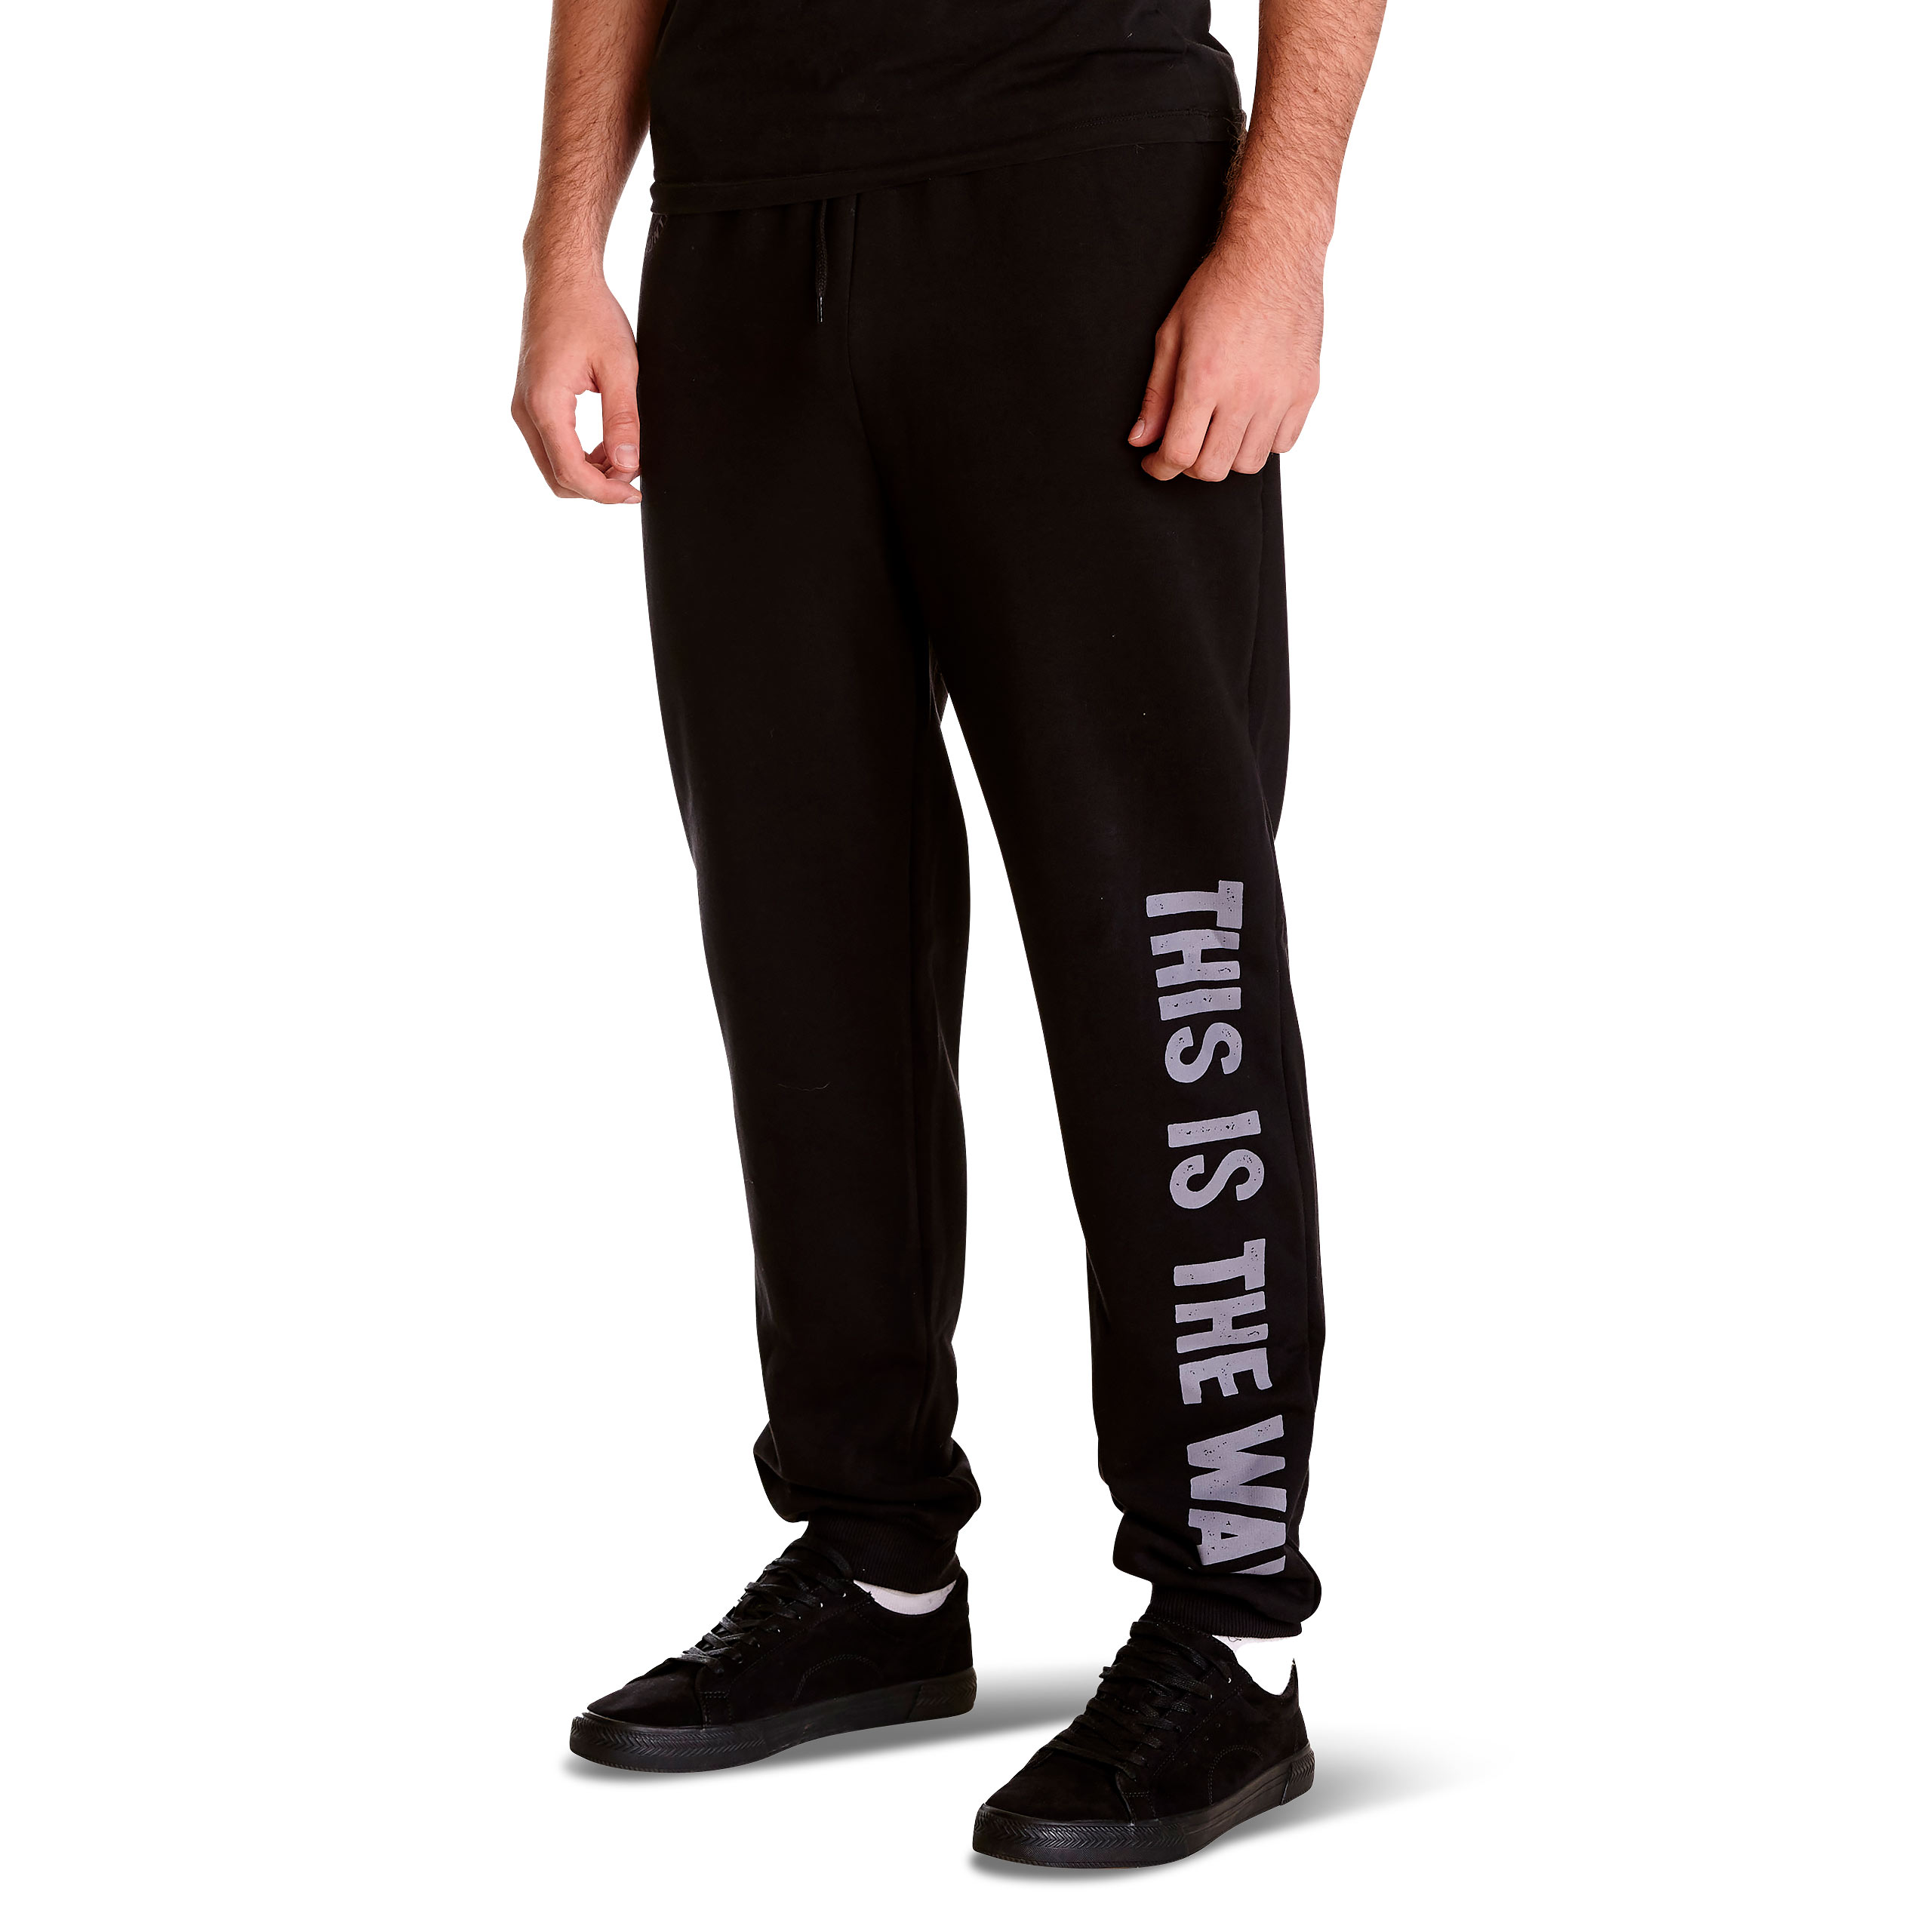 This Is the Way Sweatpants black - Star Wars The Mandalorian